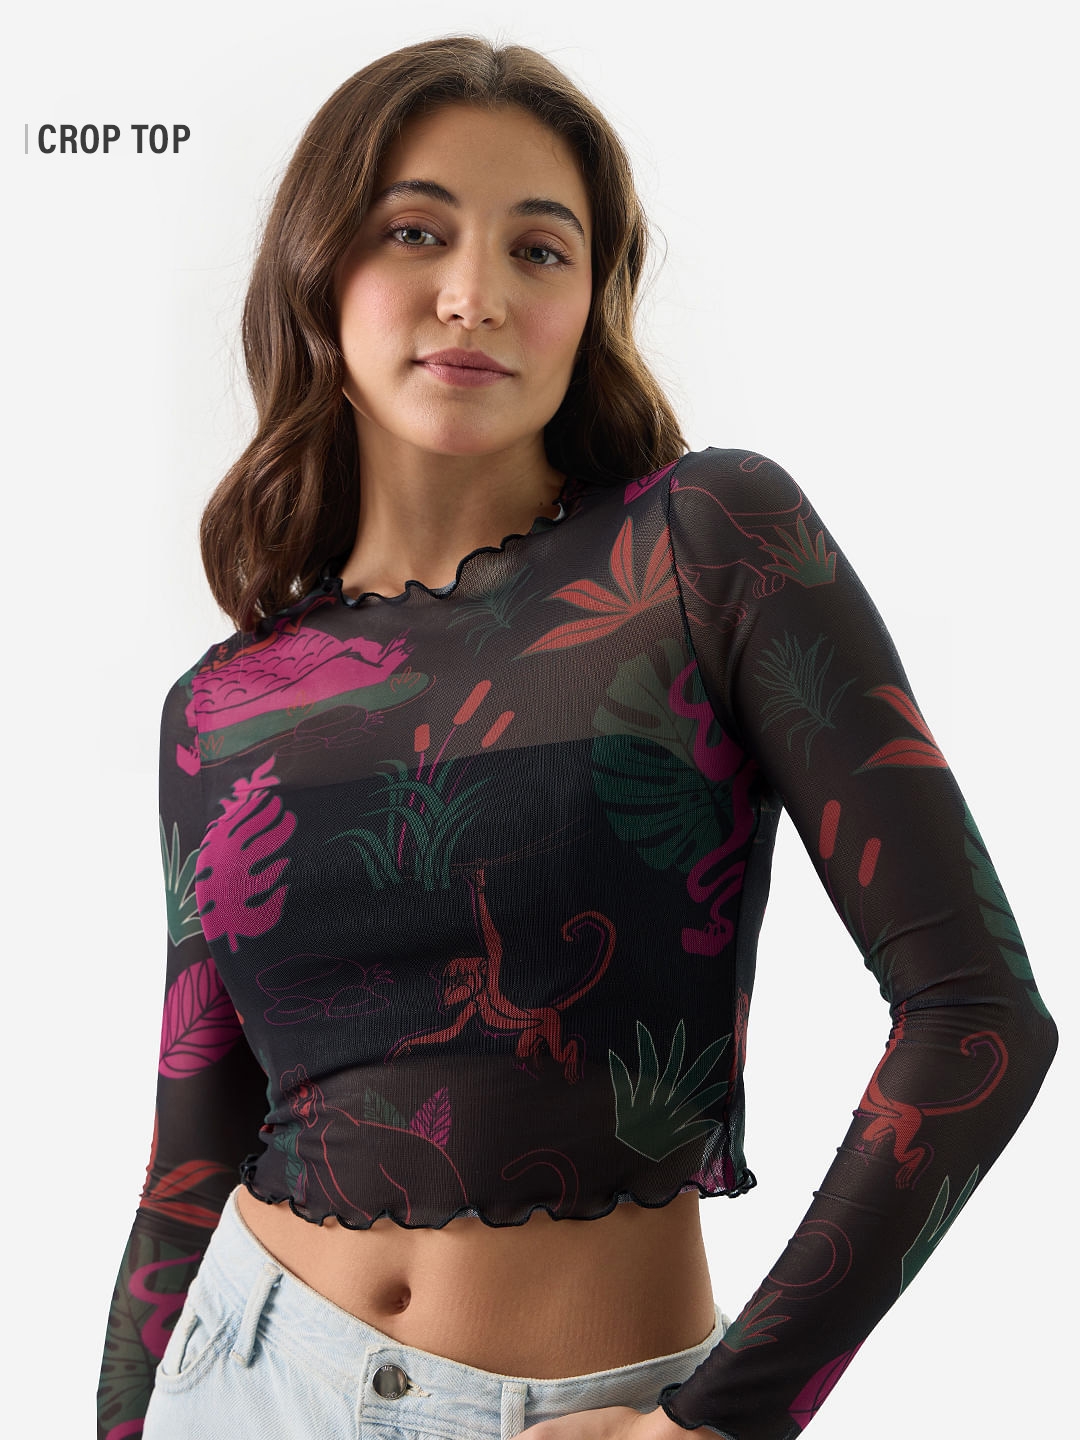 The Souled Store | Women's Mesh Top: Jungle Book Women's Cropped Tops